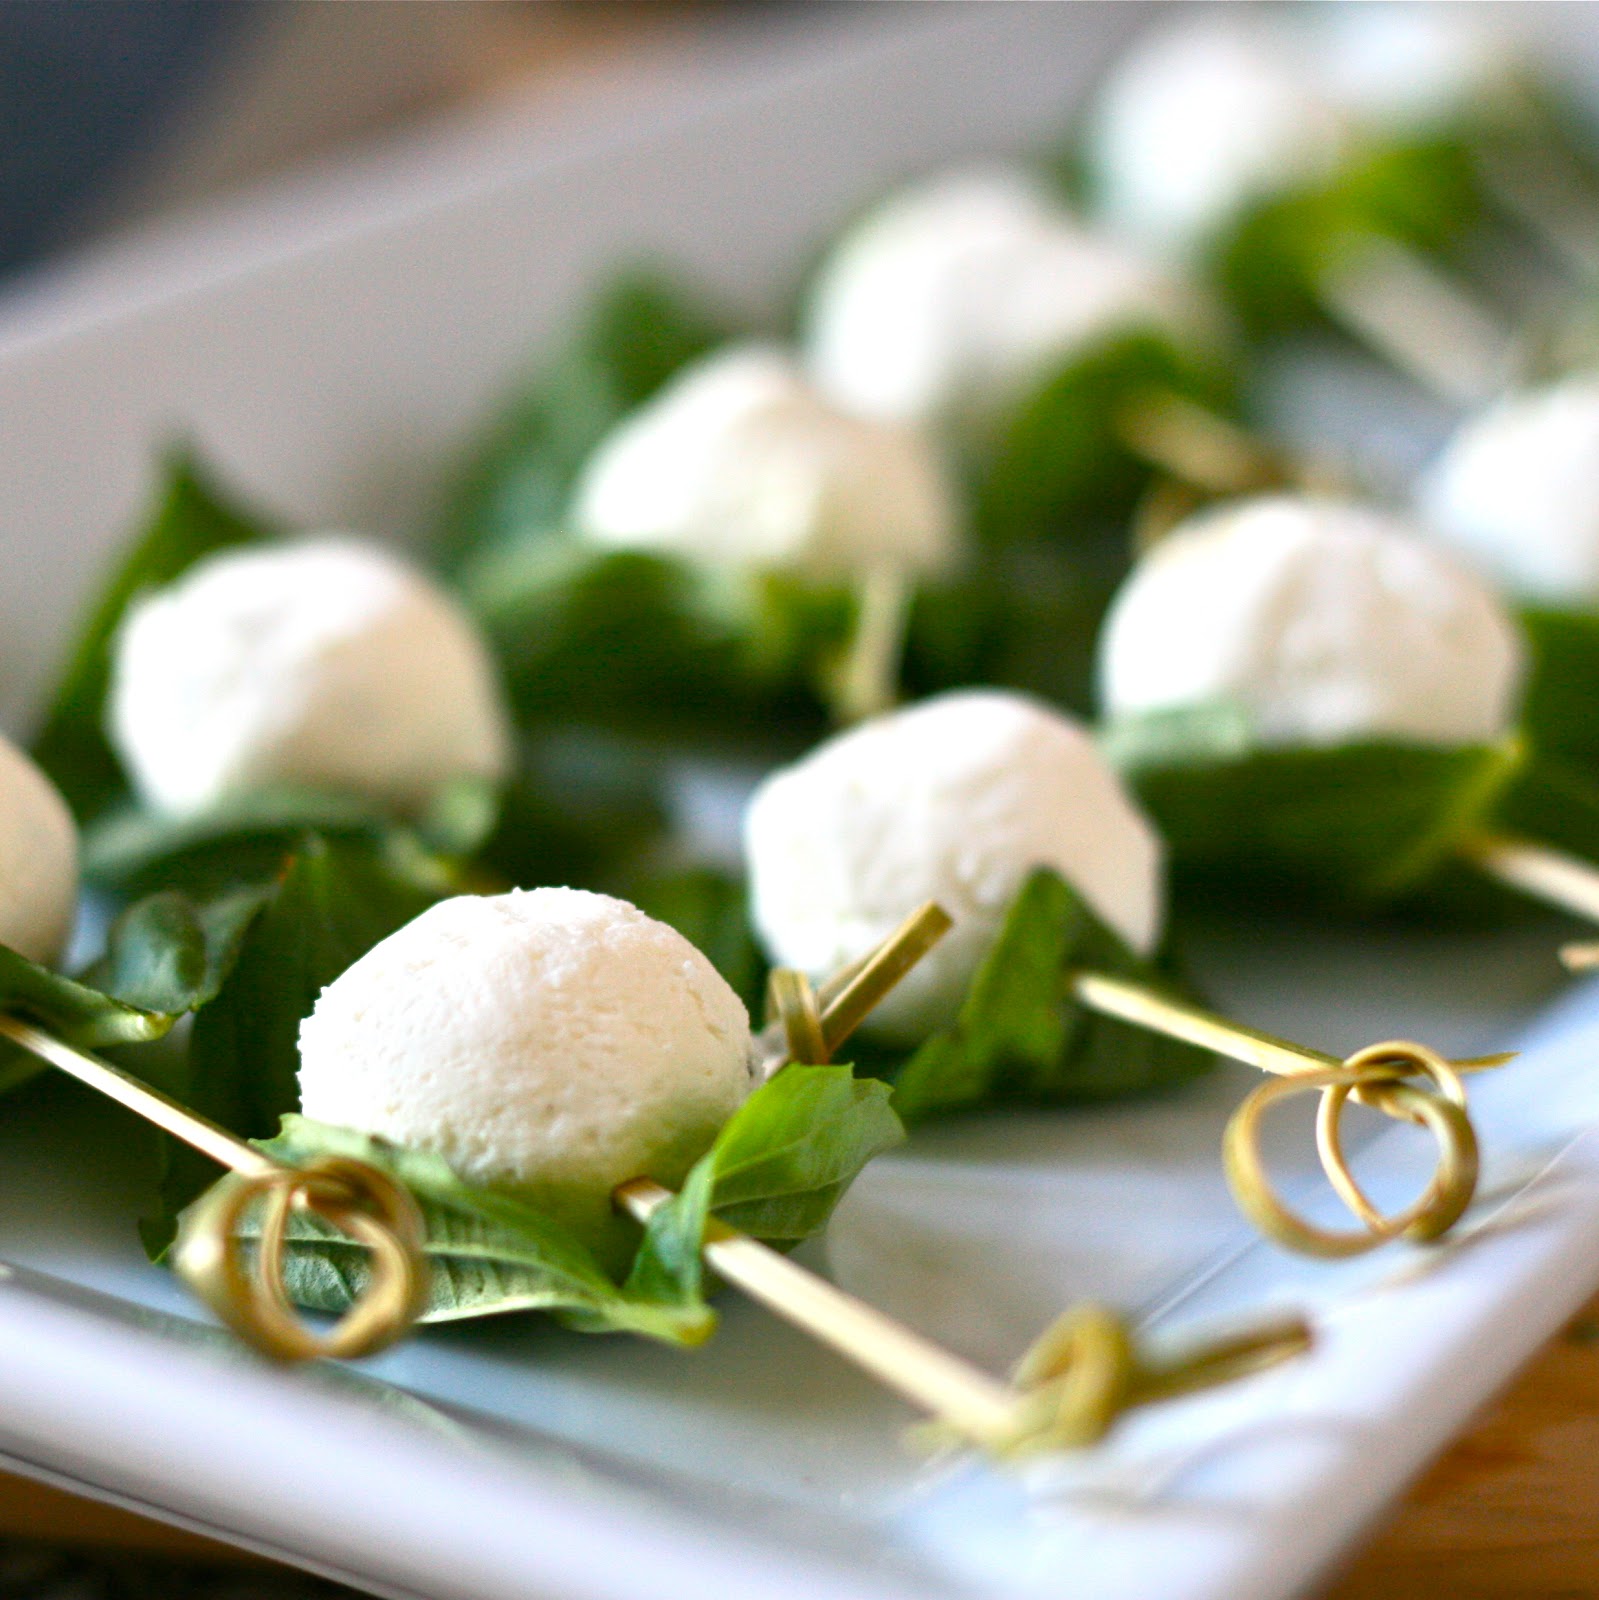 Goat Cheese and Basil Bites